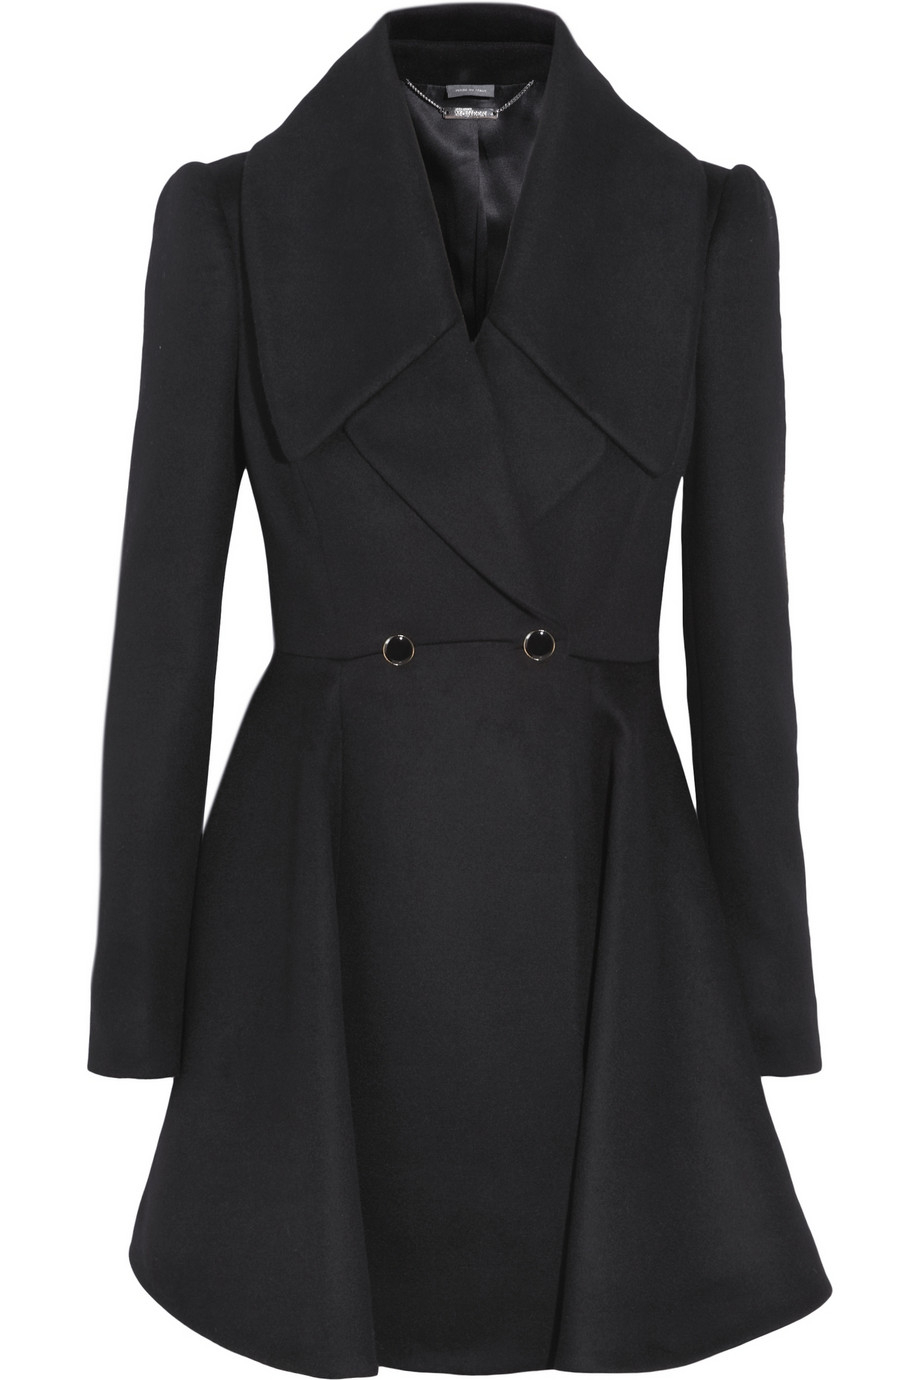 Alexander Mcqueen Wool And Cashmere-Blend Coat in Black | Lyst